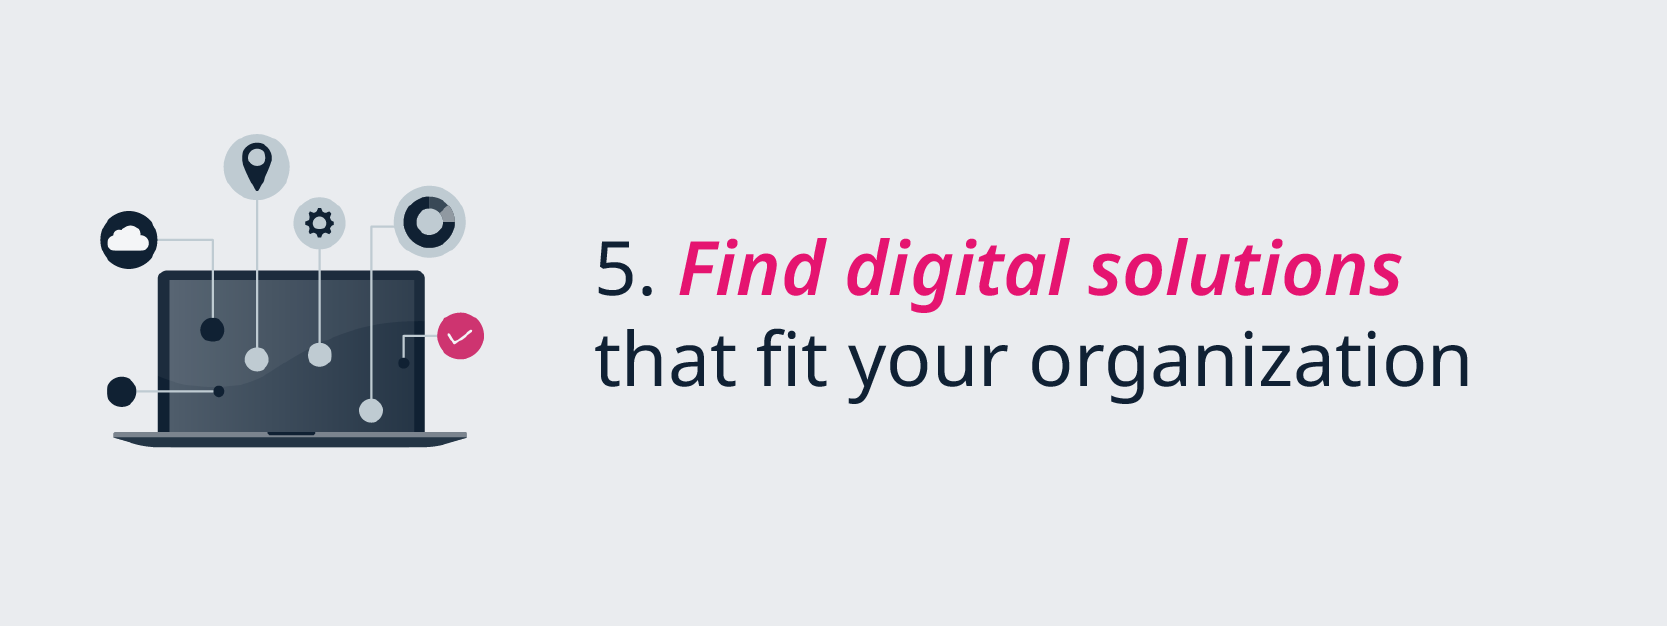 Step 5 towards successful digital transformation: Find digital solutions that fit your organization.